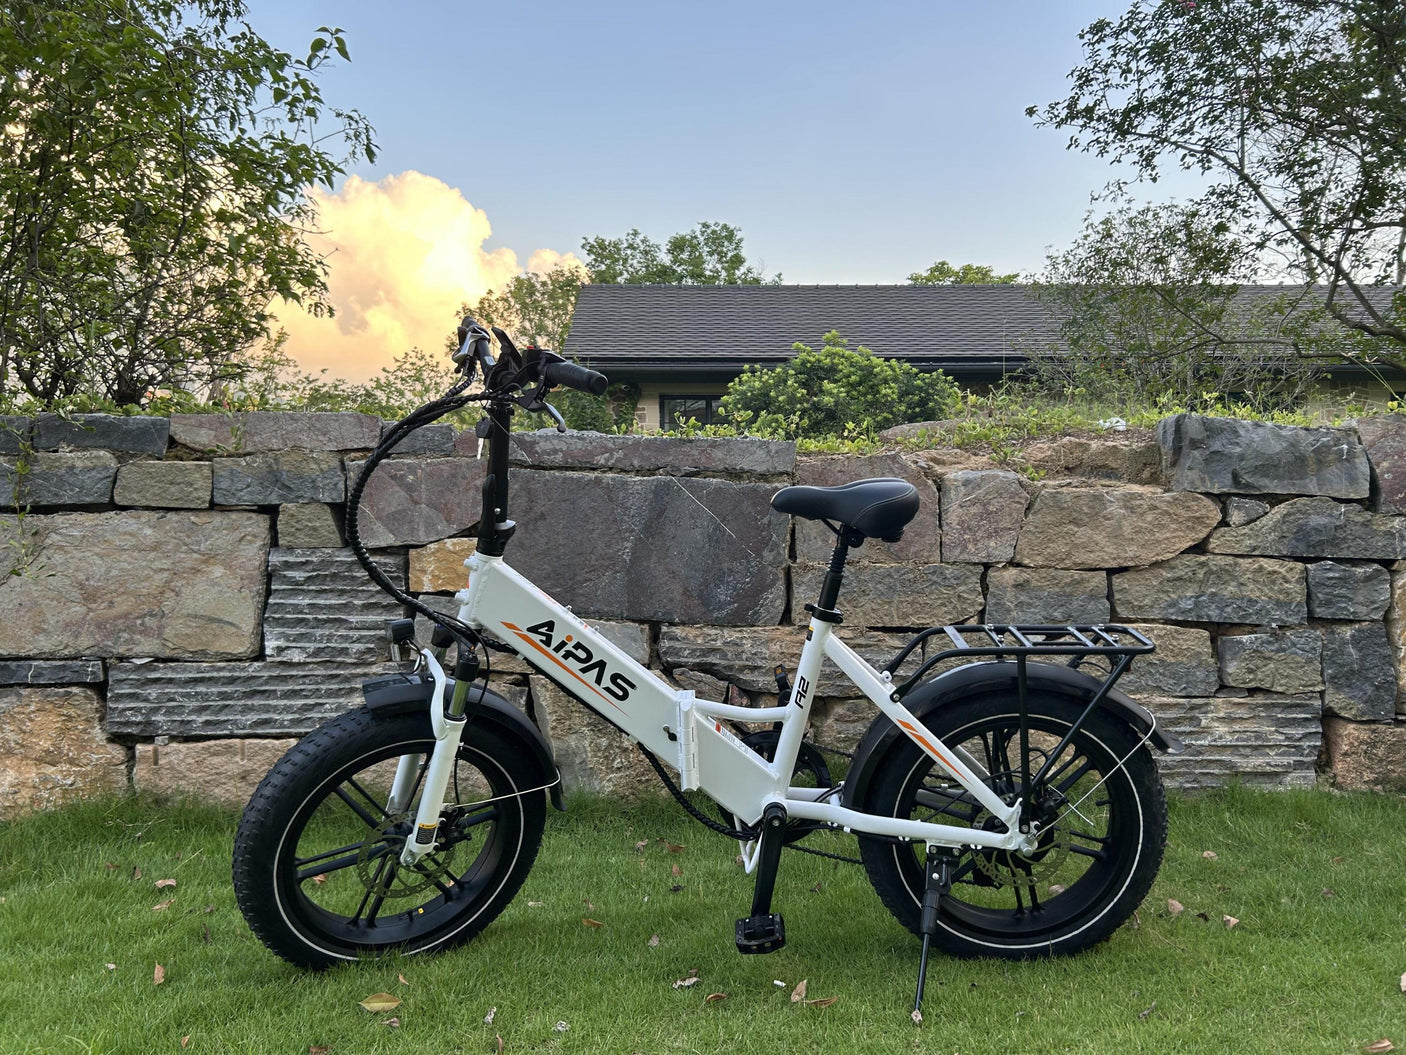 A2 ELITE Electric Bike for Adults